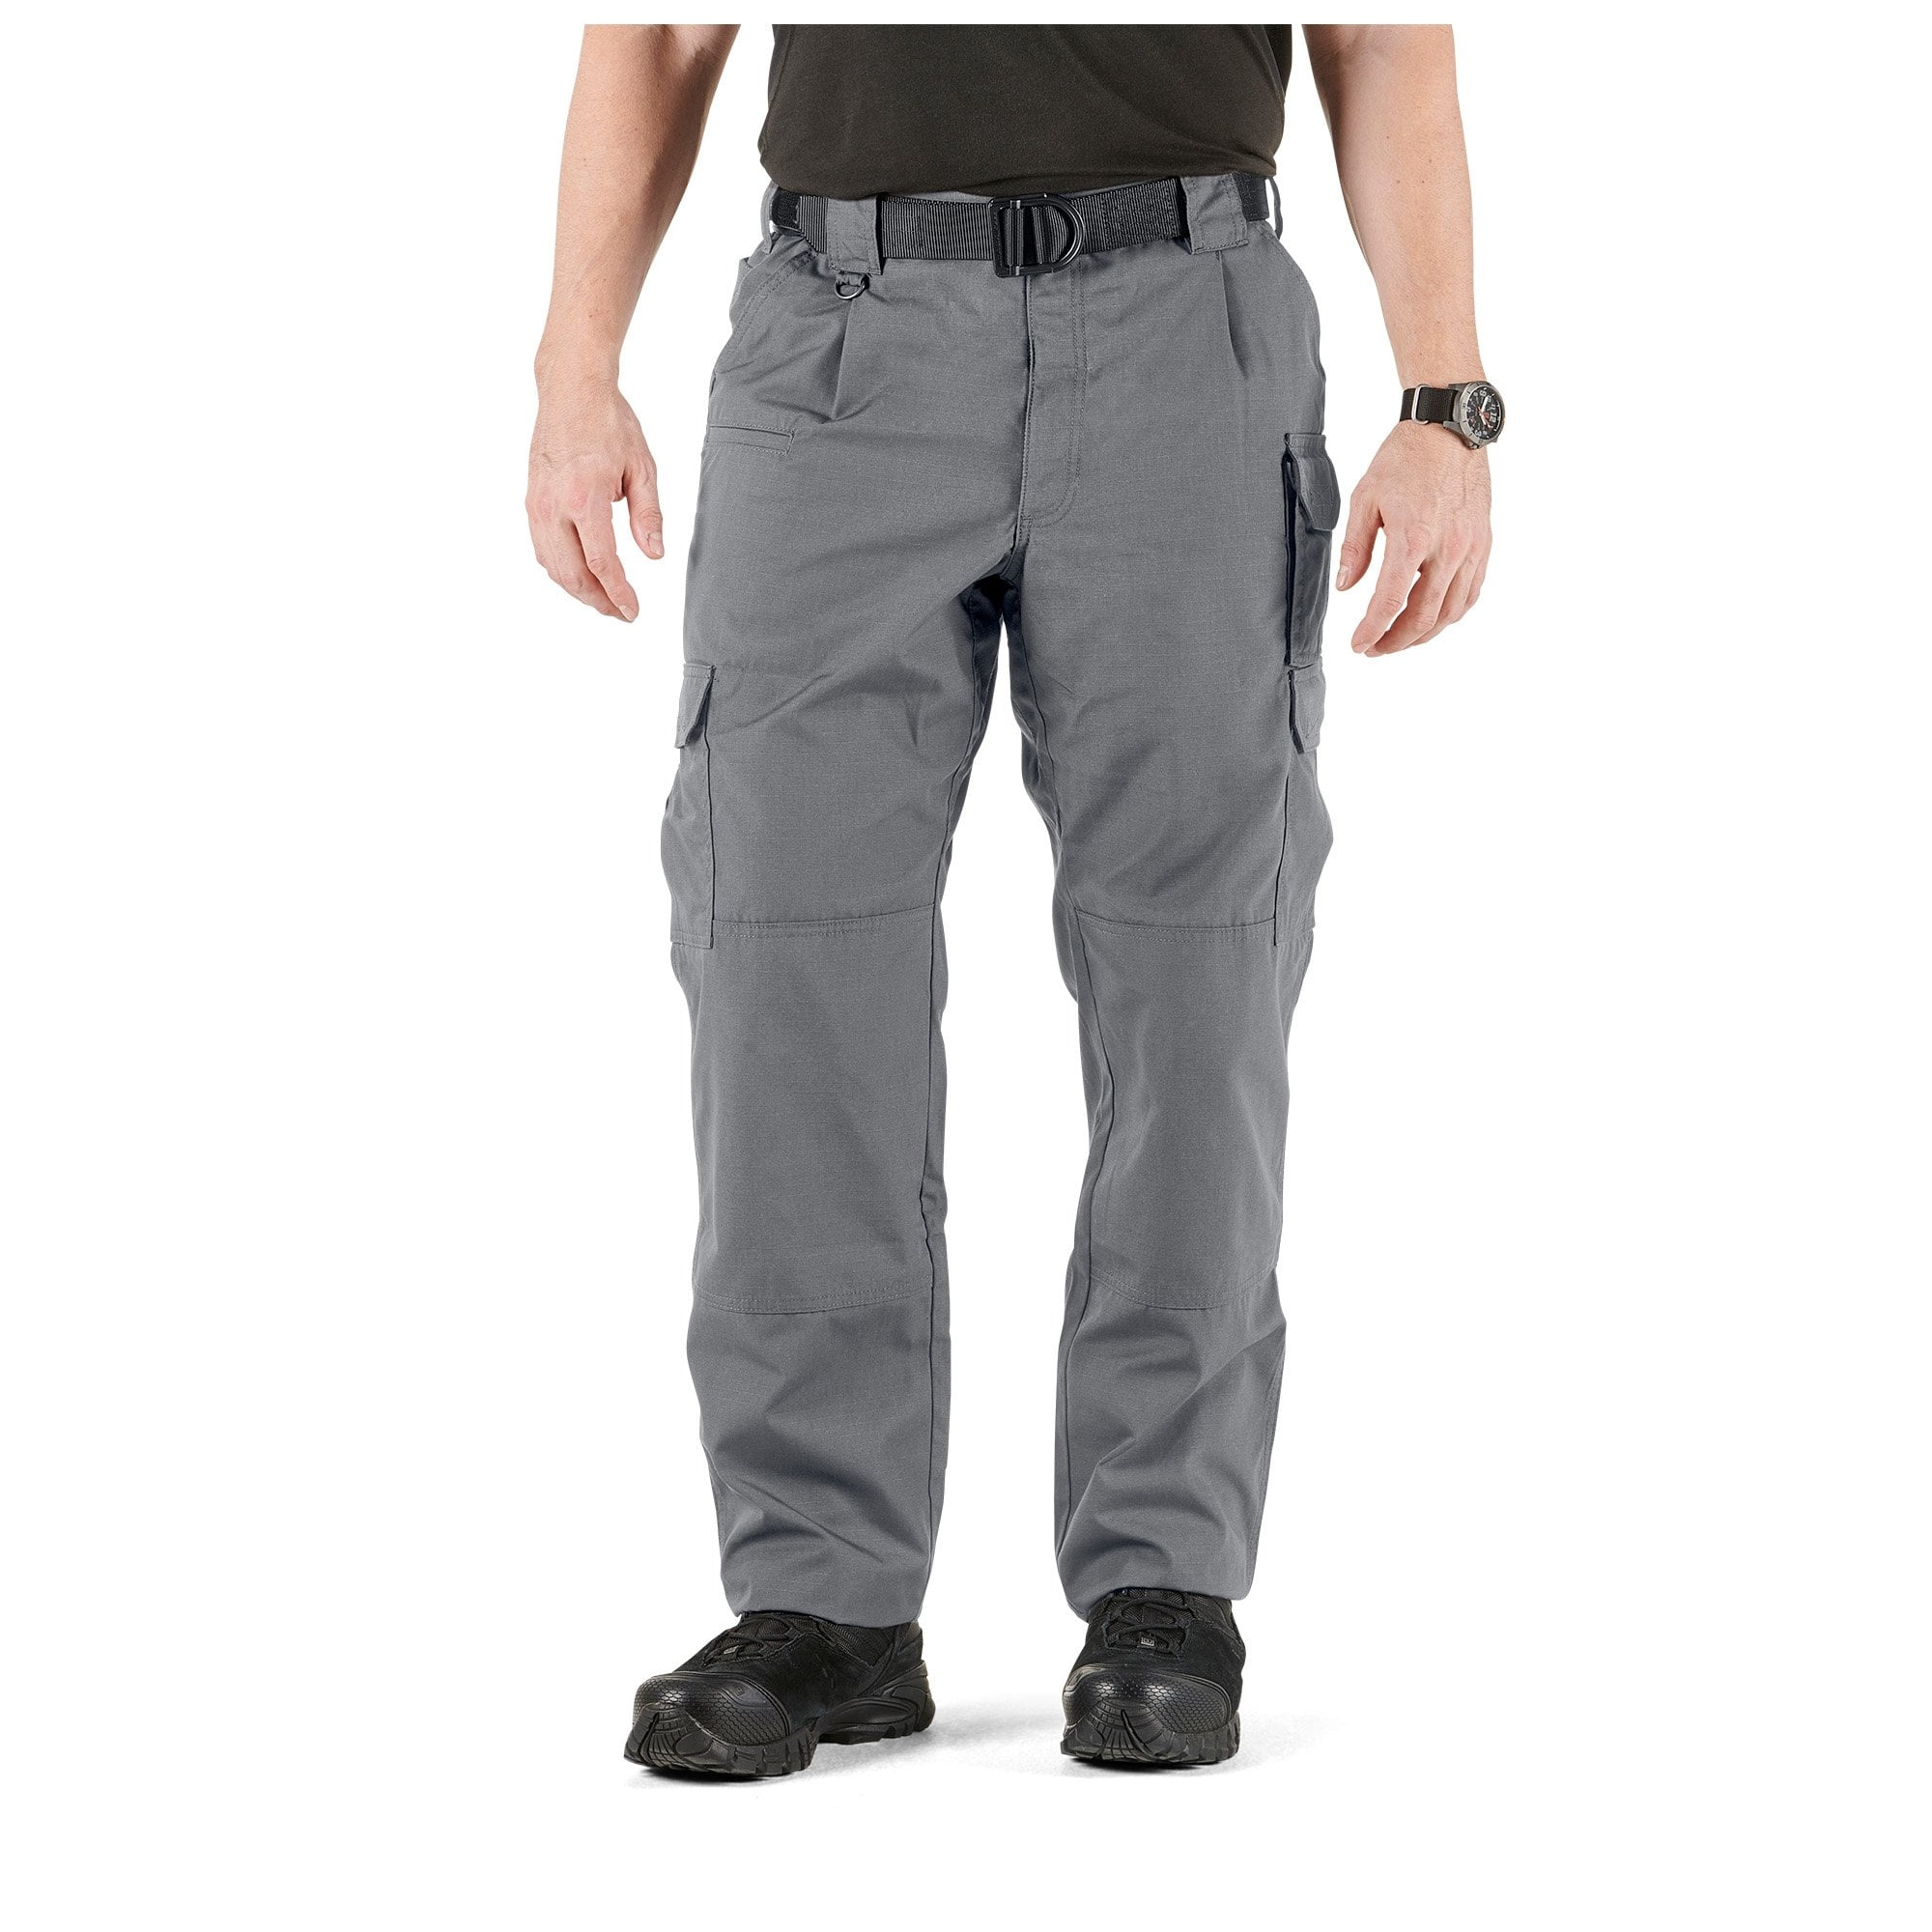 Cargo Pockets Action Waistband Style 74273 5.11 Tactical Men's Taclite Pro Lightweight Performance Pants 